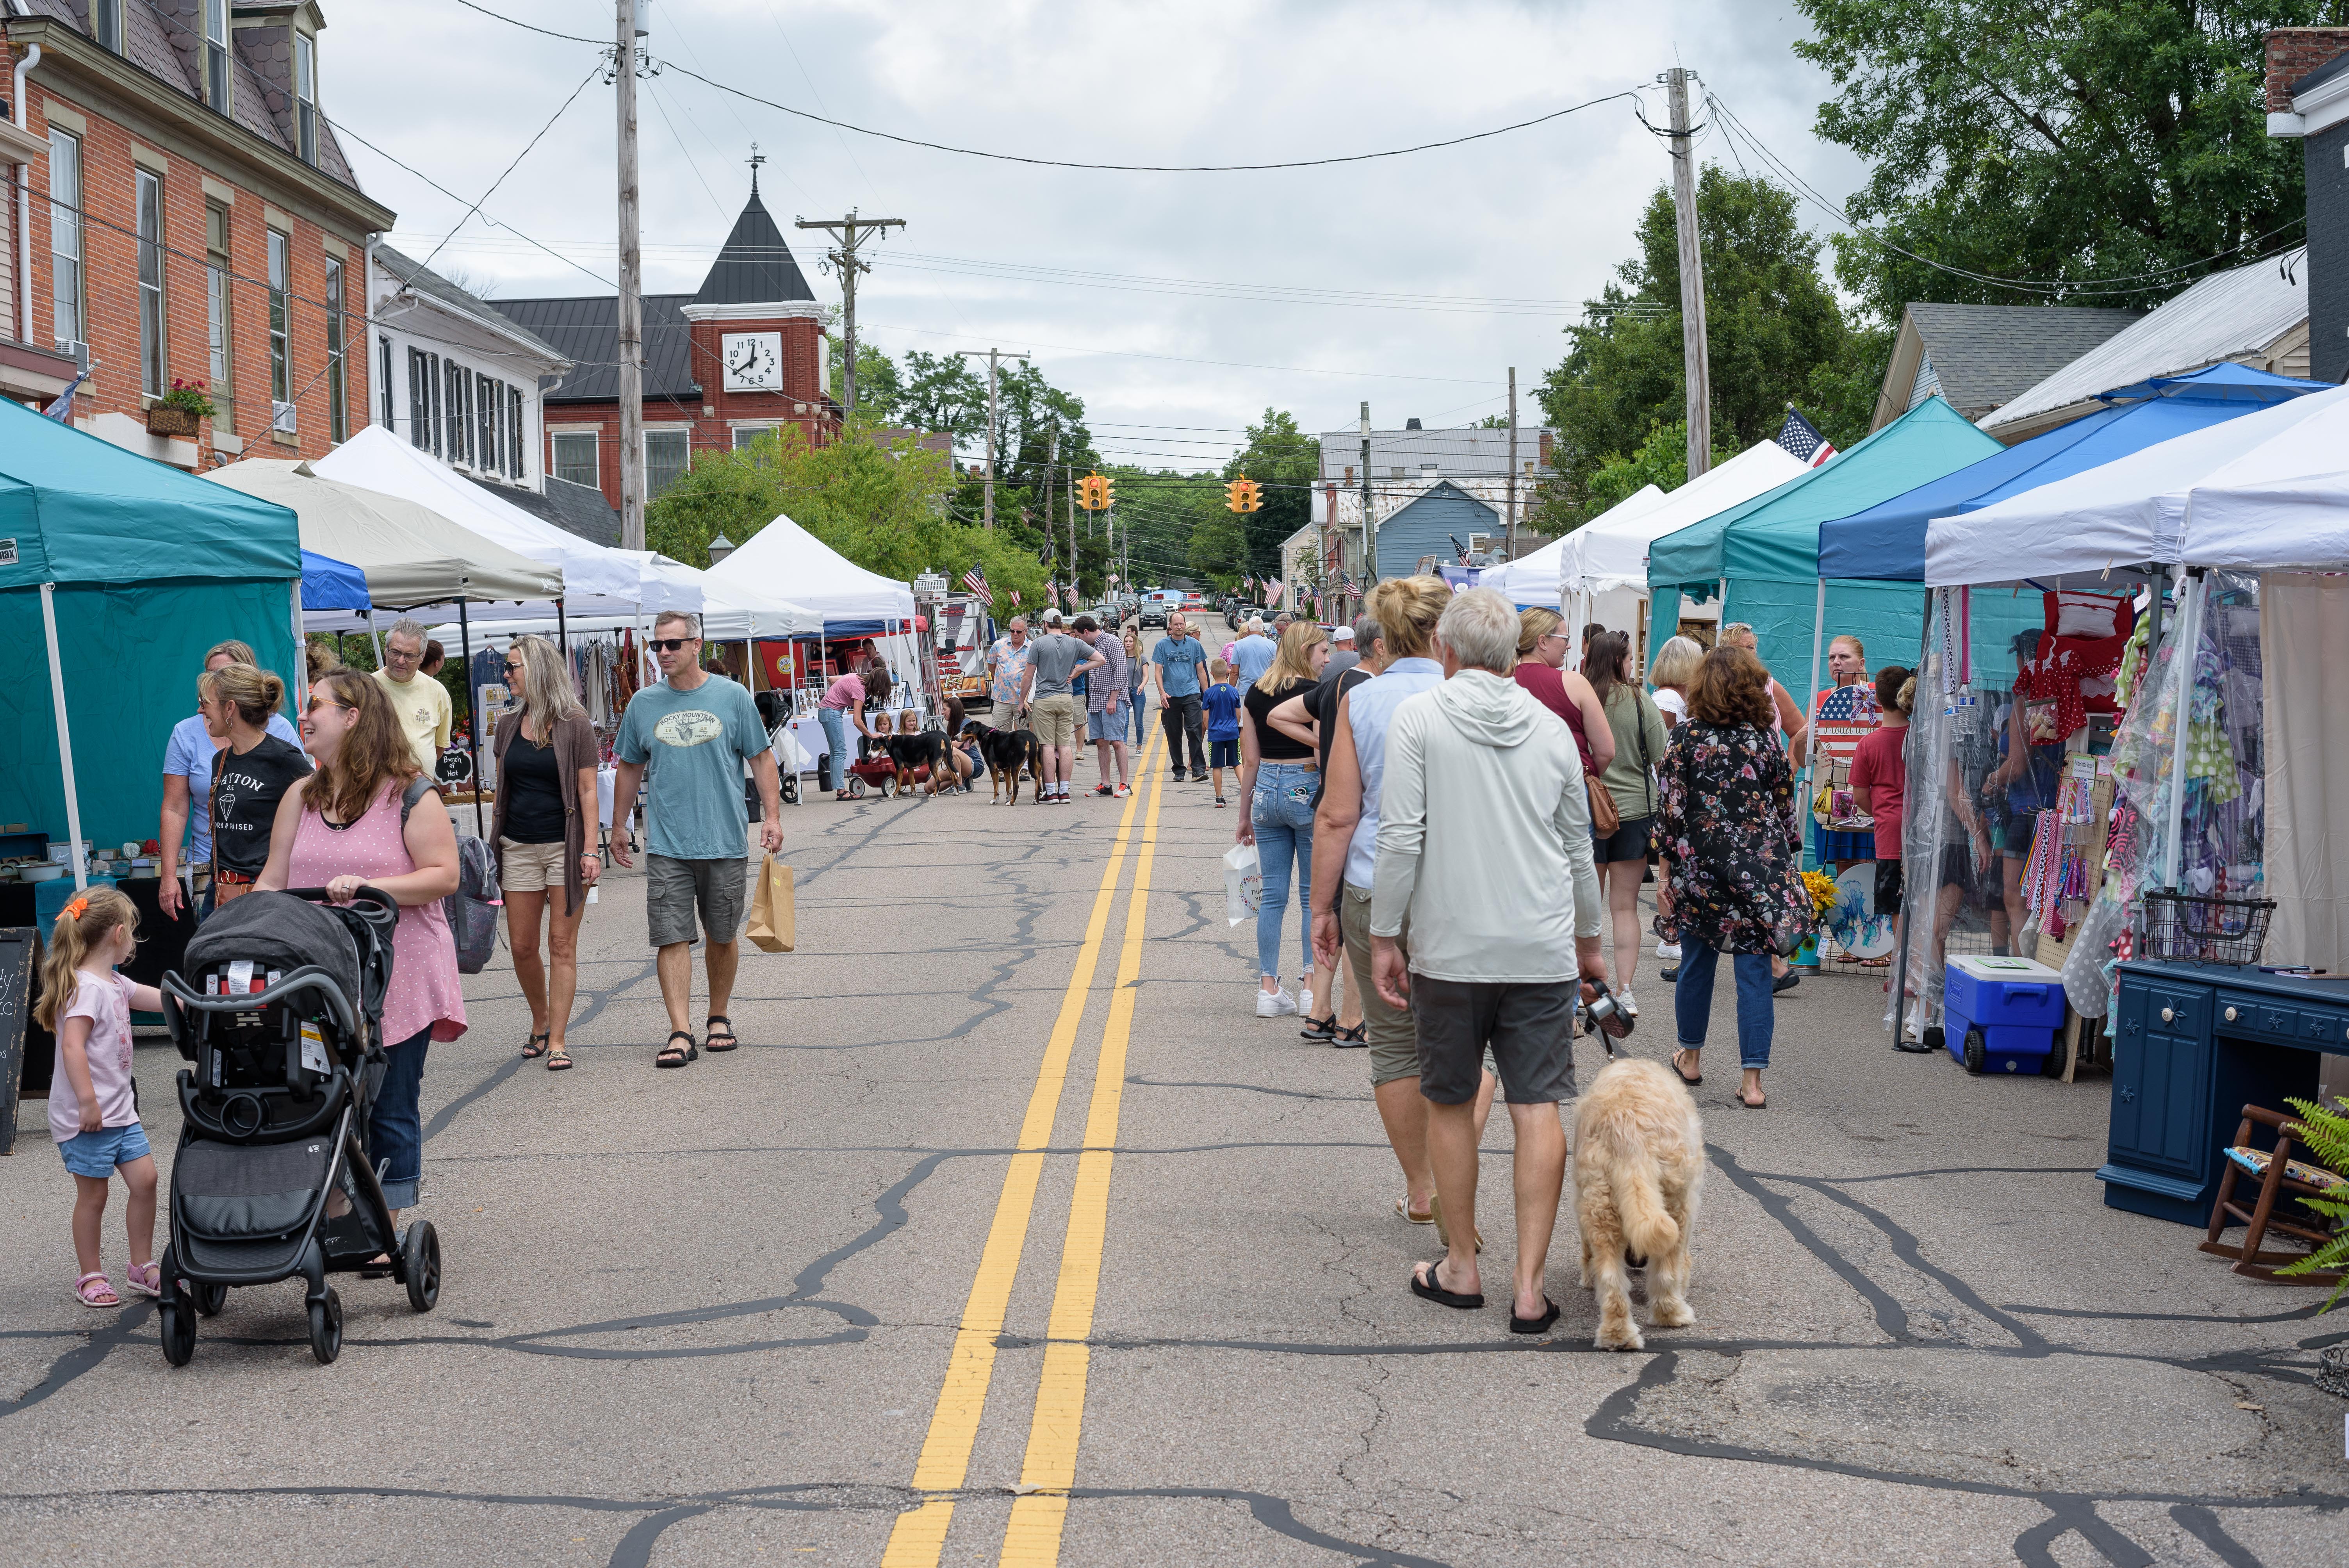 The annual Waynesville Street Faire, which happens one Saturday a month through September, returns to Main Street in Waynesville on Saturday, June 18. TOM GILLIAM / CONTRIBUTING PHOTOGRAPHER